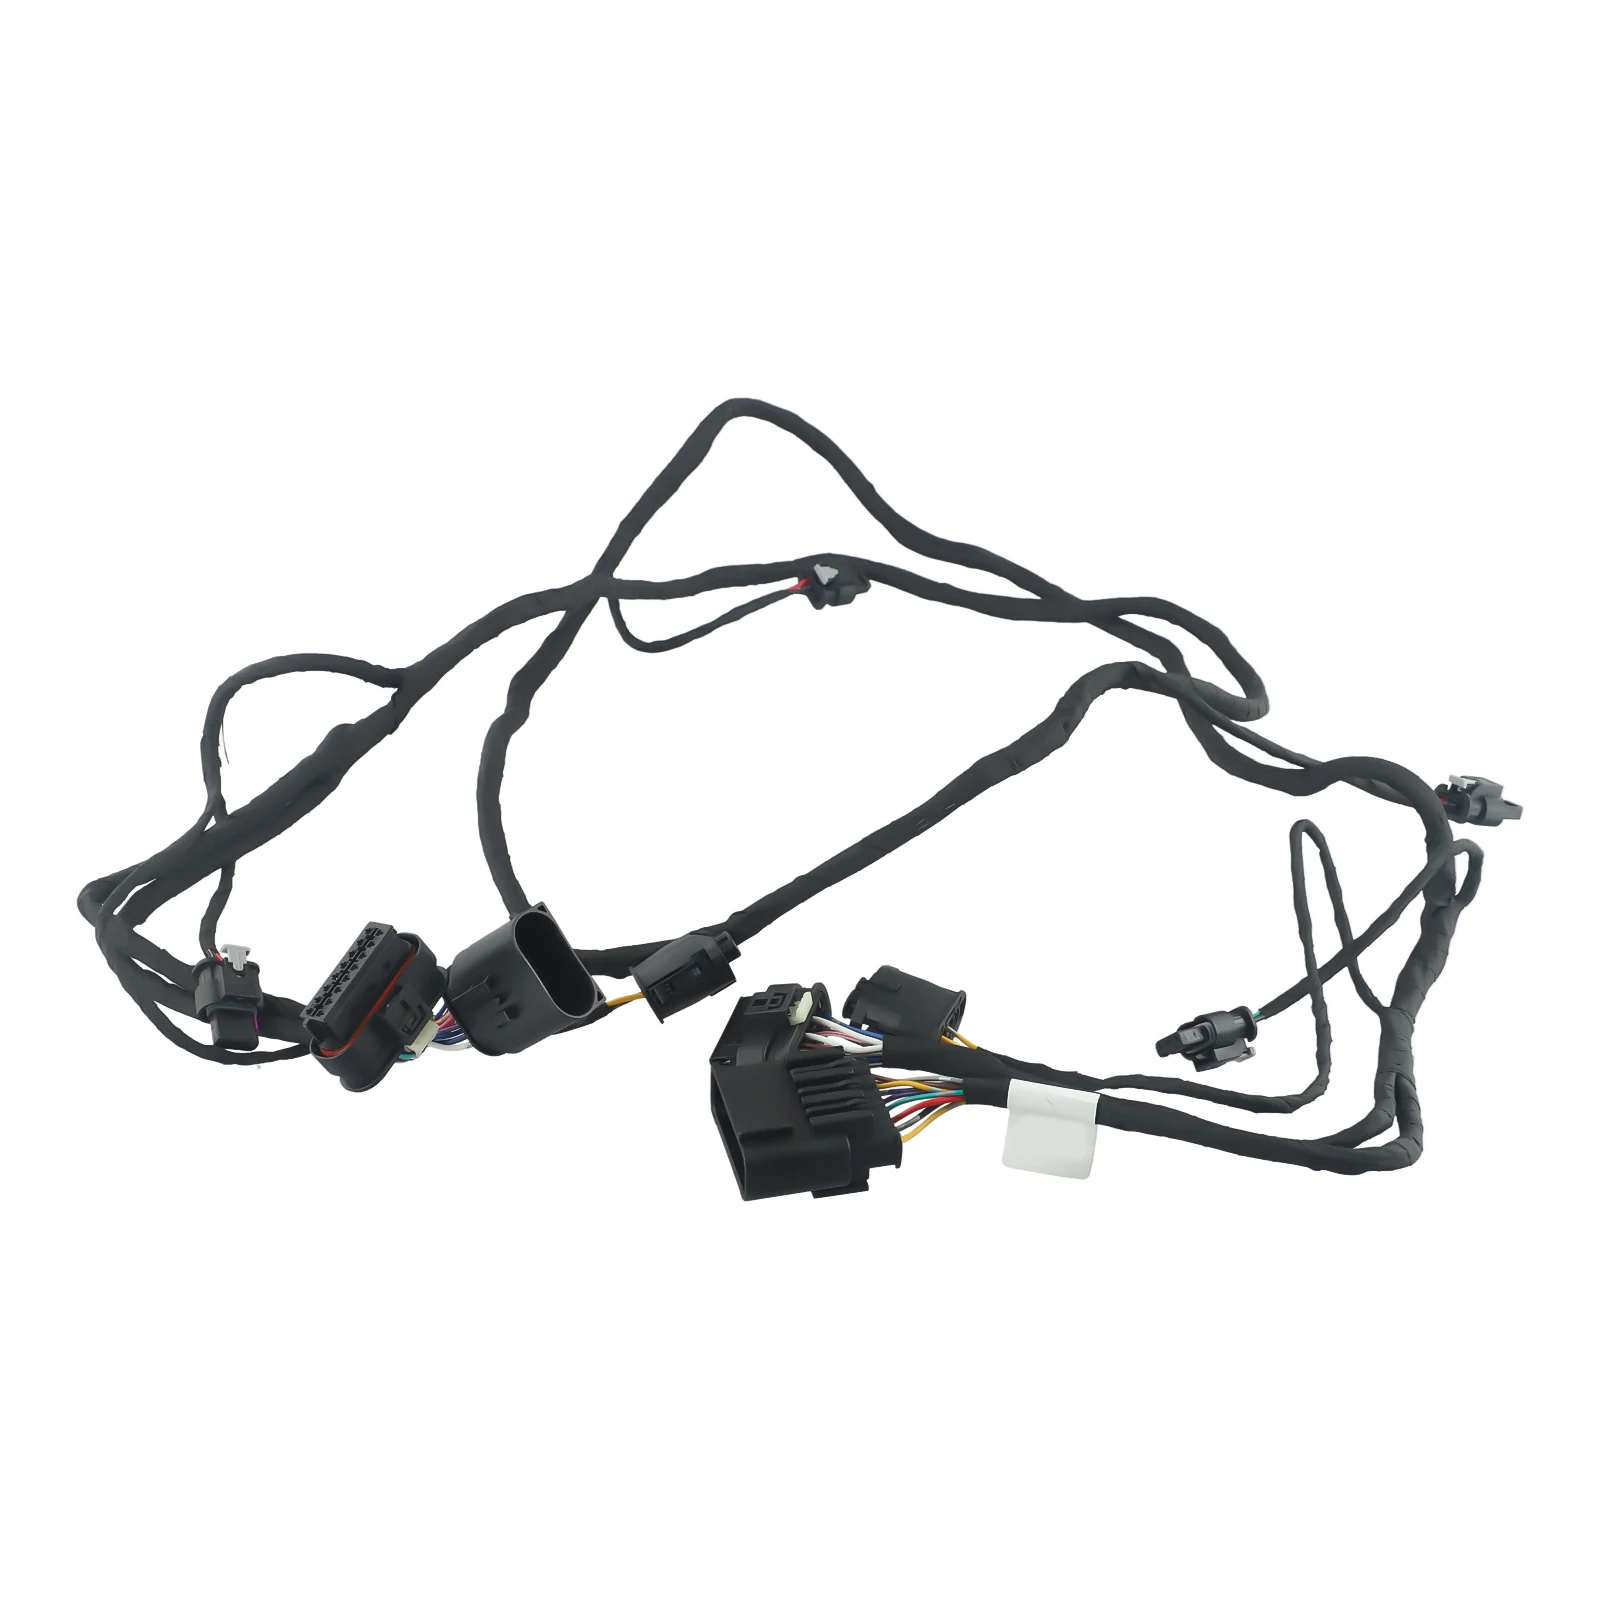 61129395453 Accessories Black Bumper Wiring Harness Practical Replacement Useful Brand New Durable High Quality